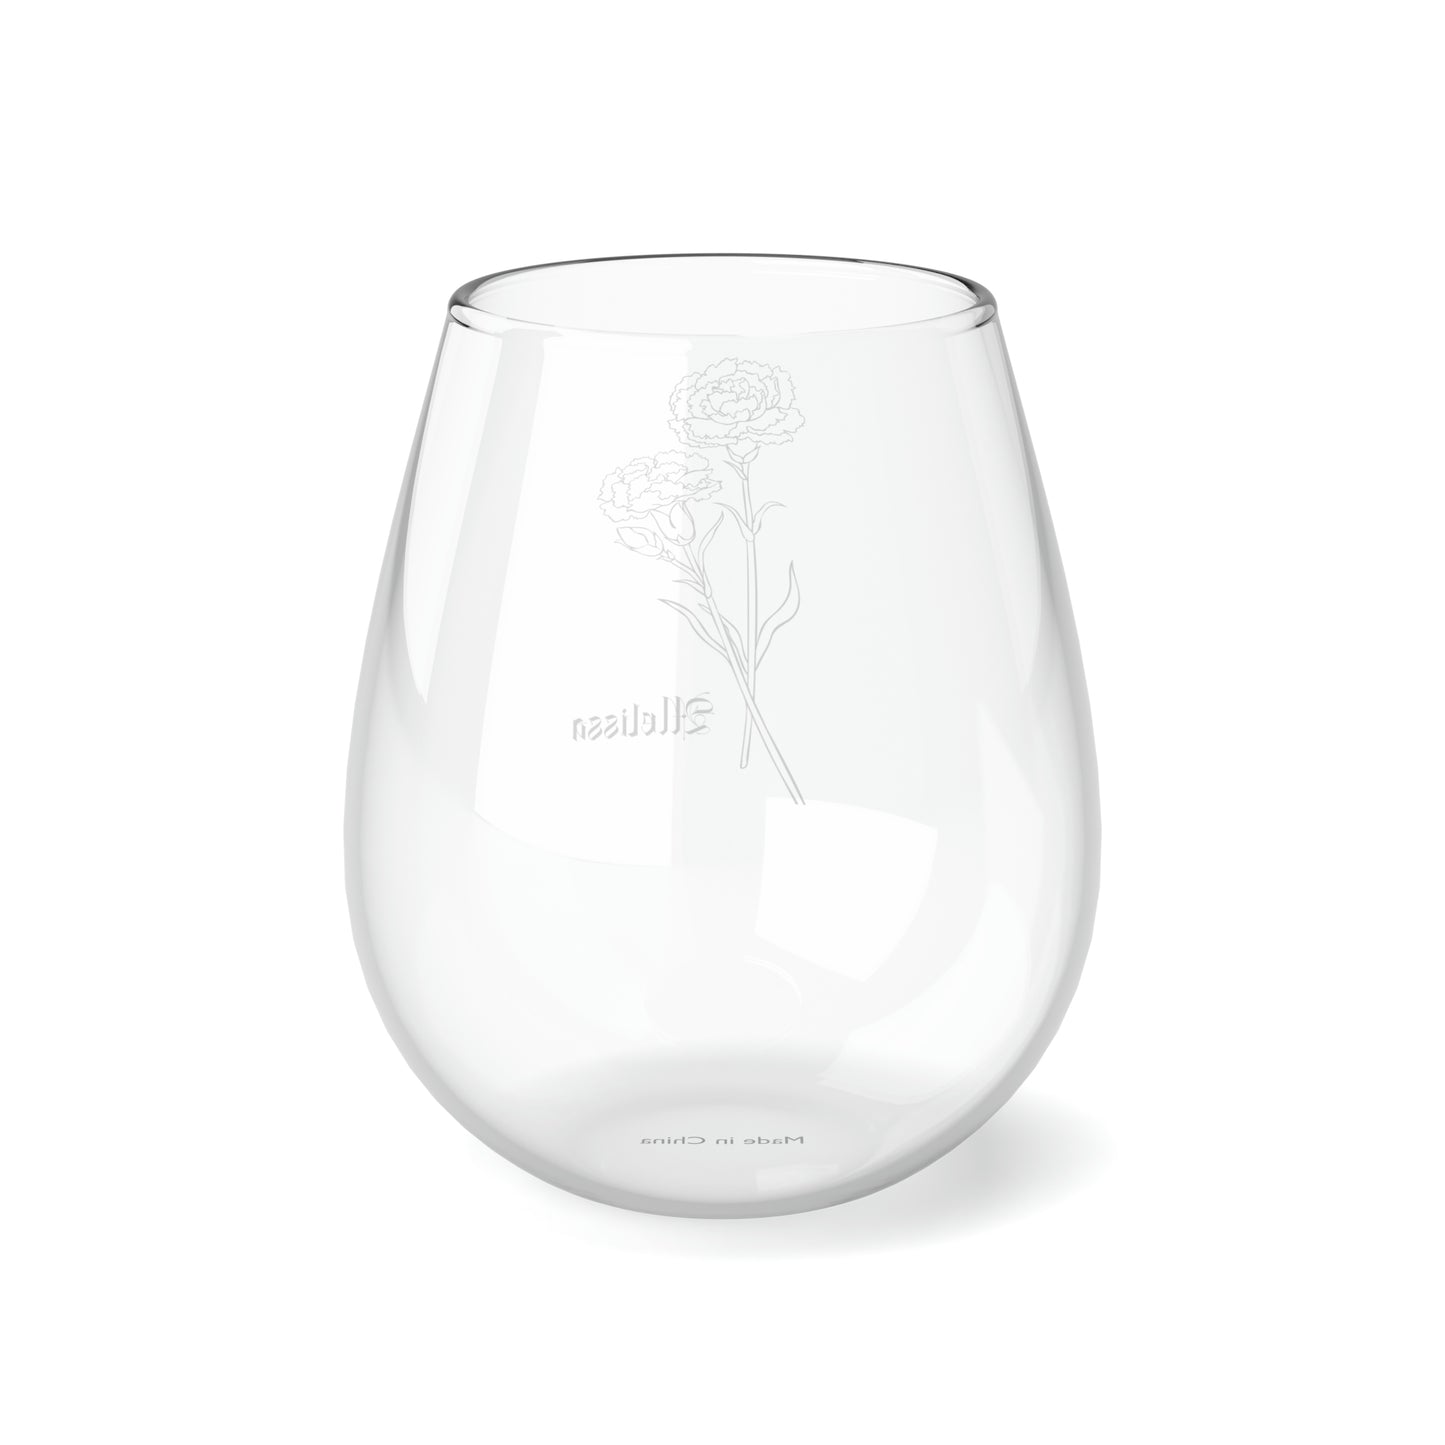 January PERSONALIZED Birth Flower Wine Glass, Birth Flower Gifts, Birth Flower wine glass, Birth Flower Gifts for Women, Gift for coworker, sister gift, birthday gift, Valentine gift, Stemless Wine Glass, 11.75oz